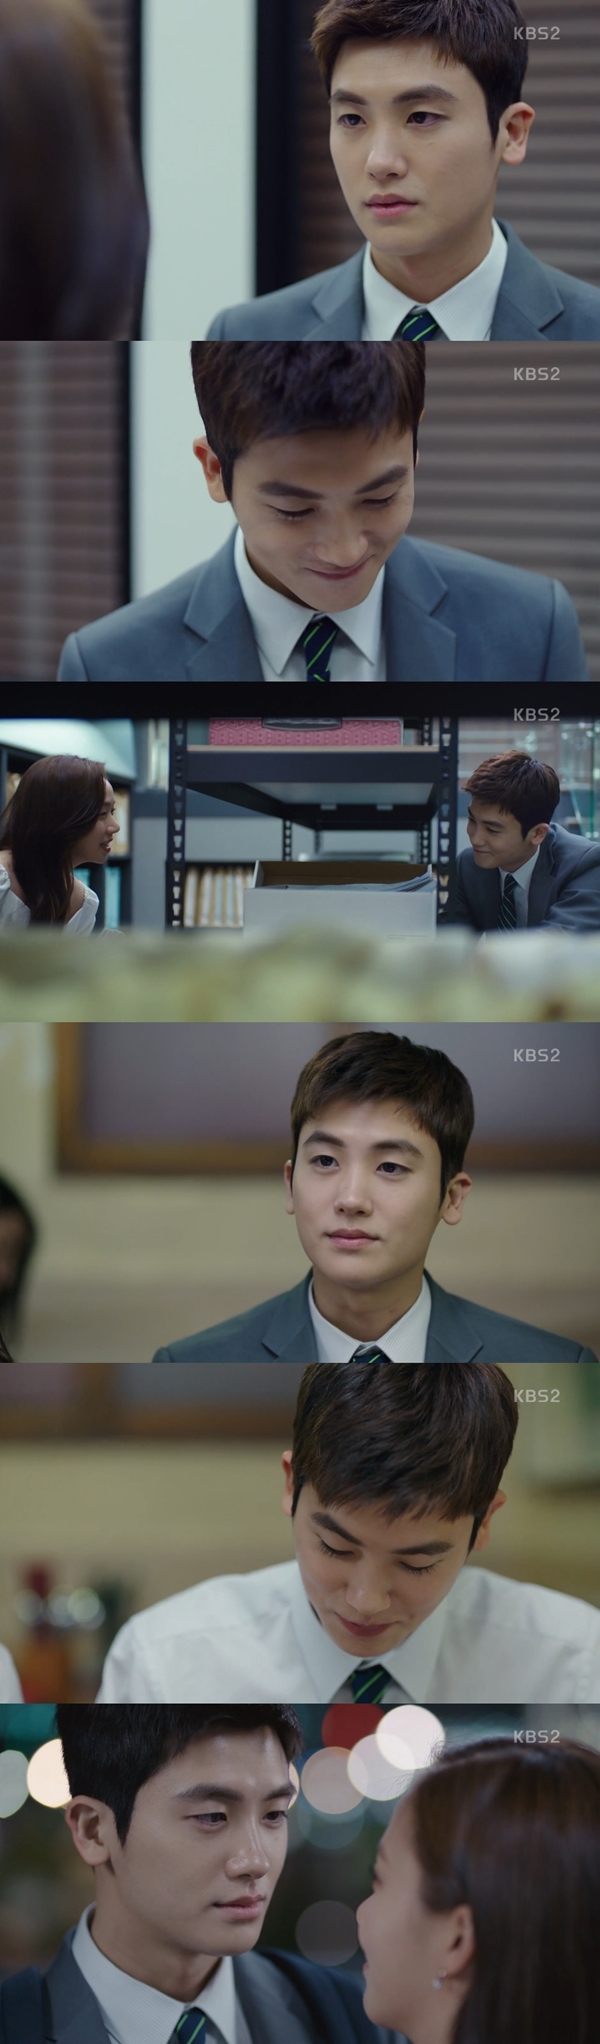 Suits Park Hyung-sik, a cute man when he loves.A man with a genius matching king who never forgets when he sees and understands it.He is a brain-sexy man who memorizes a whole book that is difficult to read and knows all the records of a few years ago.The Earrings of Madame de... is bound to shake.It is the story of Park Hyung-sik (played by Ko Yeon-woo) in KBS2s tree drama Suits (played by Kim Jung-min, director Kim Jin-woo, and production monster union entertainment Pictures).Park Hyung-sik plays a genius matching king in Suits, and a fake new lawyer, Ko Yeon-woo, who has empathy, and faces viewers.In the play, Ko Yeon-woo is a person who needs to show his own growth story as well as his romance with Choi Kang-seok (Jang Dong-gun).Park Hyung-sik shows his unique character expression ability and draws his own color with his own color and Suits.In the 13th episode of Suits, which aired on the 6th, the special charm of the character, such as Ko Yeon-woo, was noticeably outstanding in the expression of Park Hyung-sik, which sensibly captures it.At the center was the keyword Love, a radical romance of a rabbit couple who showed a thrilling kiss on the last broadcast.On this day, Ko Yeon-woo approached Kim Ji-na (Go Sung-hee) with apologetic regret that she failed to keep her dinner promise, such as hovering around her side or talking to her constantly.I just started to love, but the cuteness of a man who is still in love is outstanding.In addition, Kim Ji-na and her grandmother, or even the proposal, but the scene of the ring was not enough to add to the scene of the house theater with pink excitement.The decisive reason why the house theater cheers on Ko Yeon-woos love is because it shows a reversal from the existing character called Genius.It is a poor and awkward appearance in front of love, with a perfect memory of anything, excellent situation judgment and coping ability.It is a special charm of the character of Ko Yeon-woo to answer Yes honestly even though it seems to jump to the question whether he has not been in love.Above all, the expression of actor Park Hyung-sik, who perfectly captures the lovely charm of this kind of actor, can not be missed.Park Hyung-sik conveys all the true heart, excitement, throbbing, and affection with one eye depending on the situation.Here, we show the change of the character flexibly depending on who the opponent is.In fact, everyone will react slightly differently to each other, but it is not easy to express them in characters because they need sensual and detailed acting.But hes a man who changes more in love. Hes got to steal the audience. Park Hyung-sik, who thought he was just a romance.Because of Park Hyung-sik, viewers will also wait for Suits in front of TV.